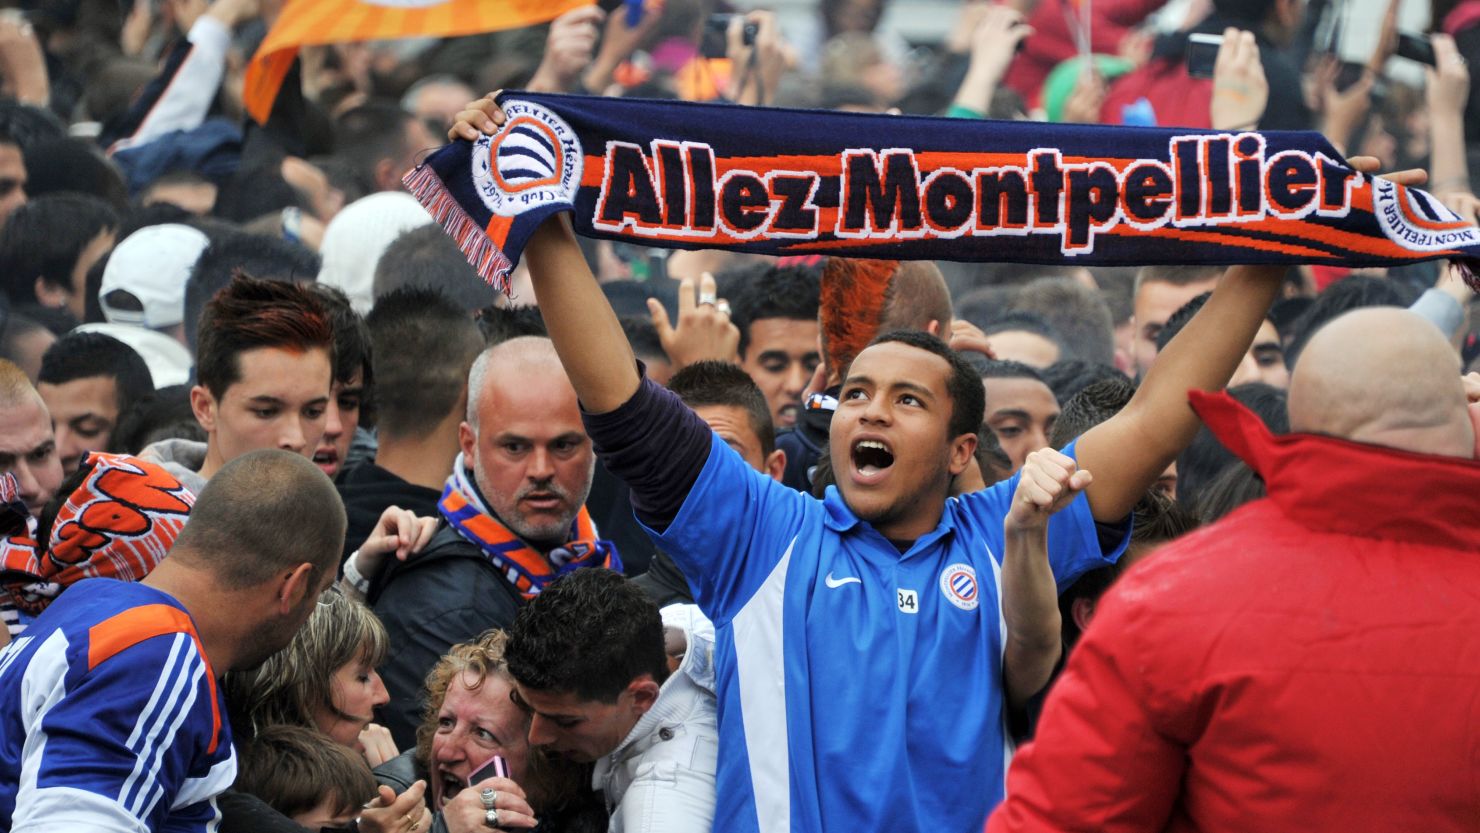 Fans celebrate Montpellier winning the French league, the first time the team has ever won the title.